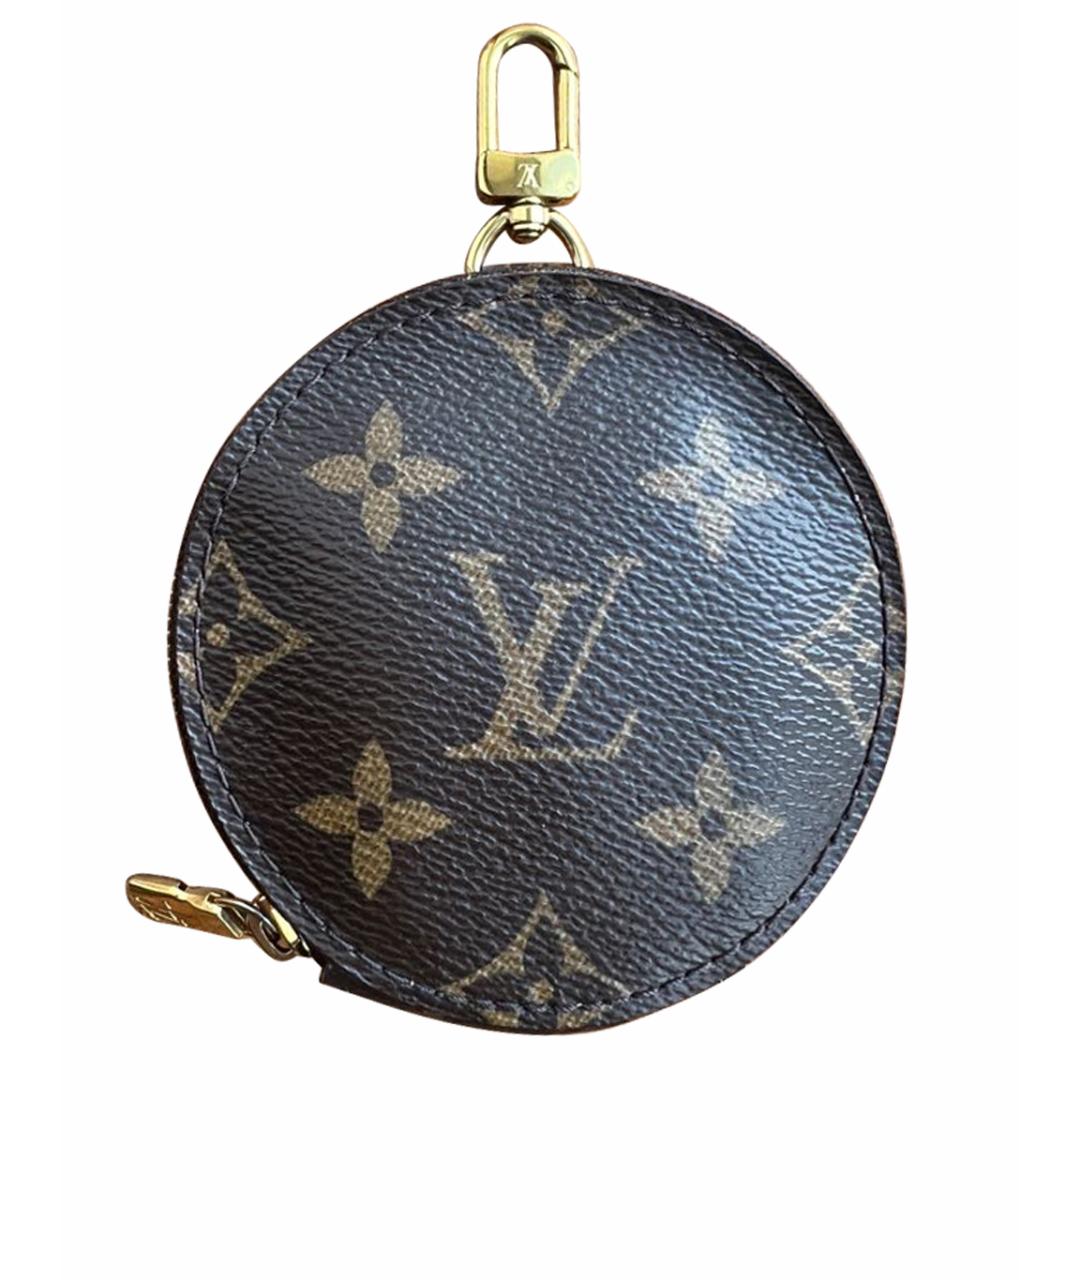 LOUIS VUITTON PRE-OWNED Мульти кошелек, фото 1